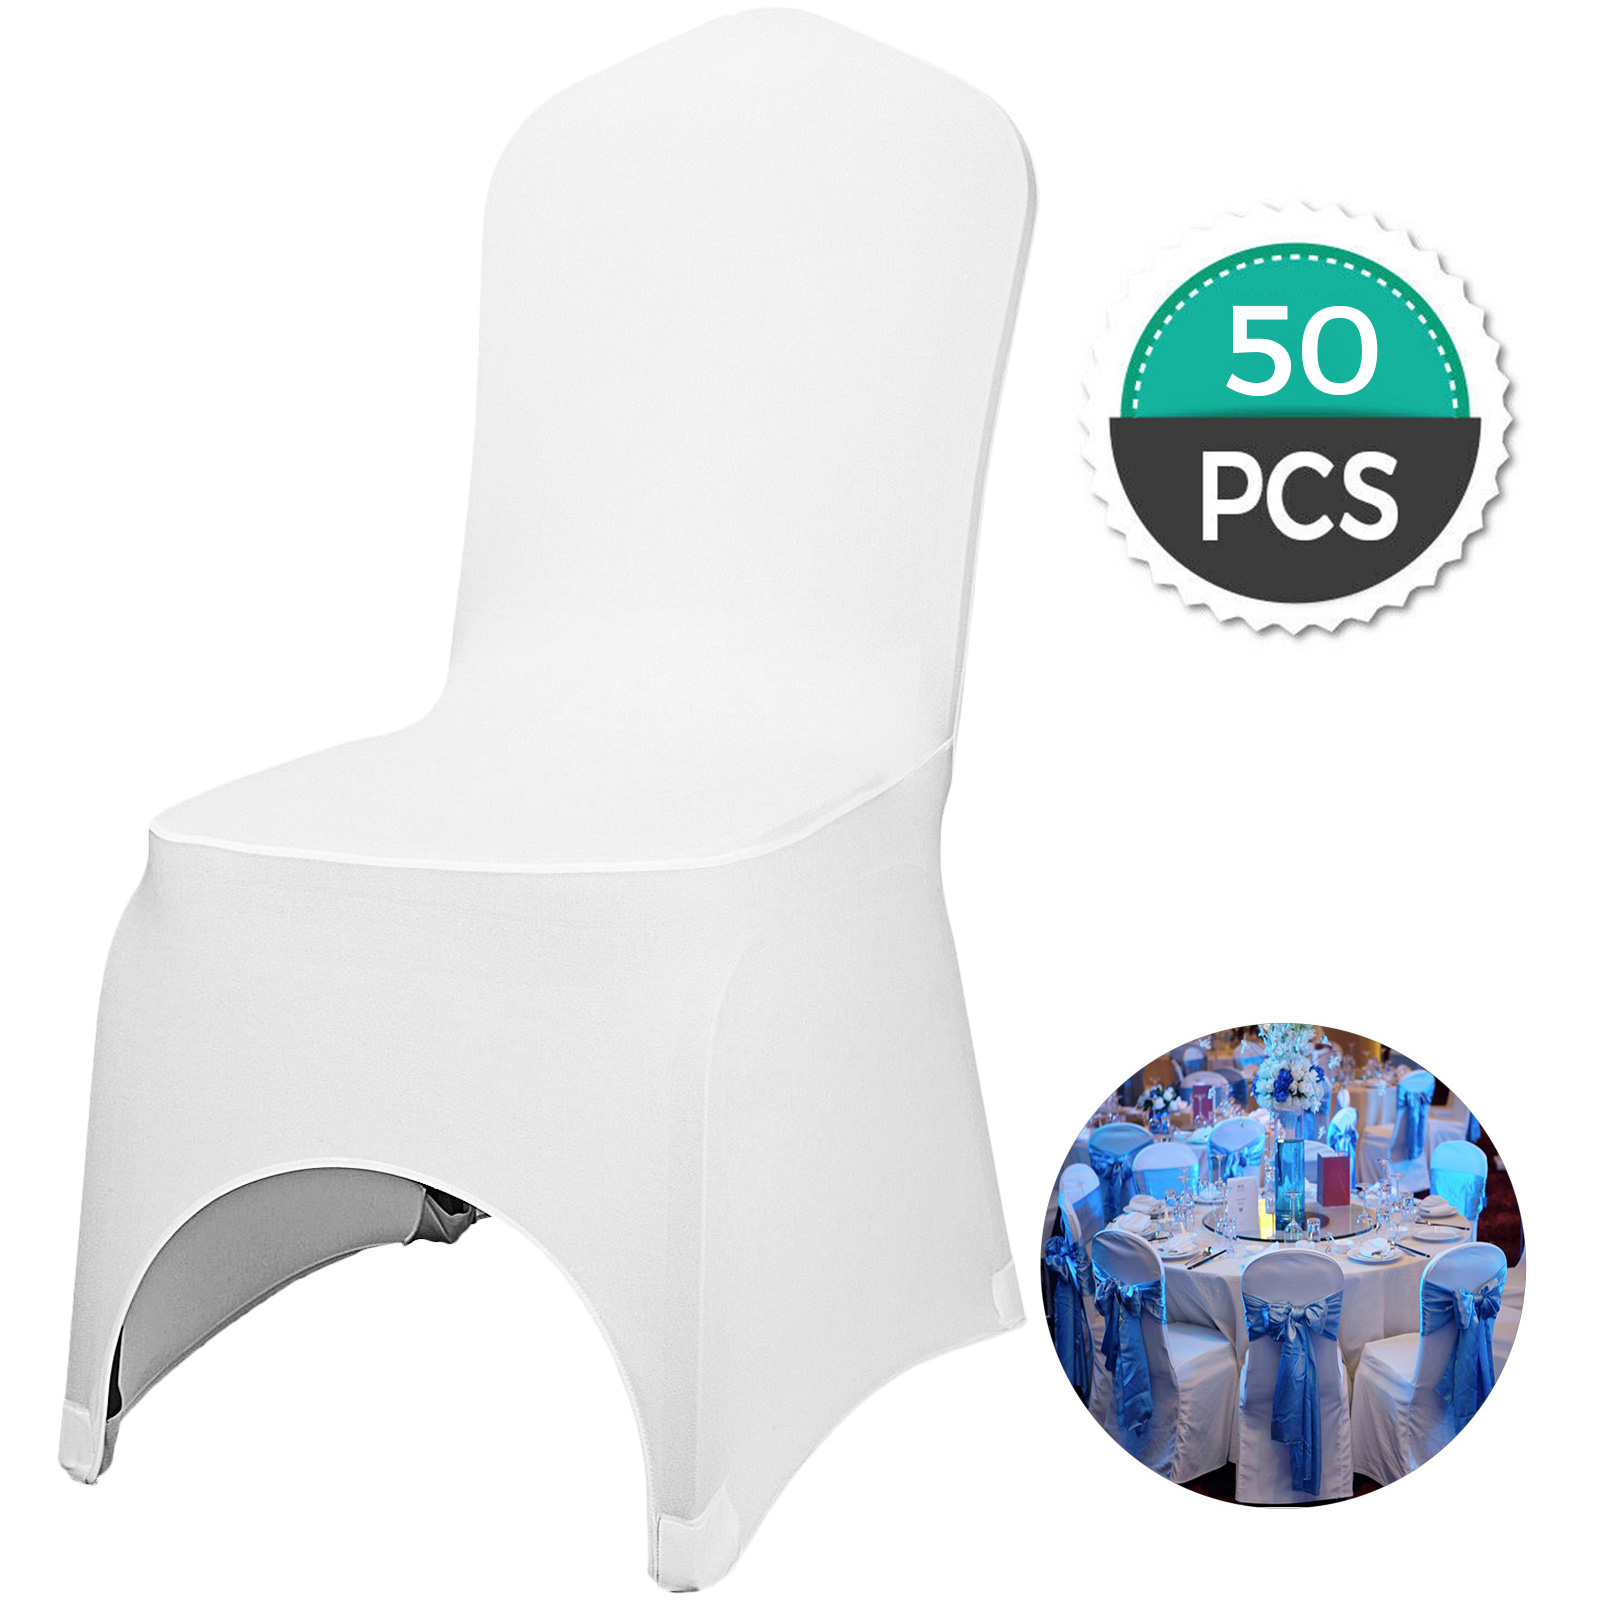 50/100 White Flat Arched Front Covers Spandex Lycra Chair Cover Wedding Party